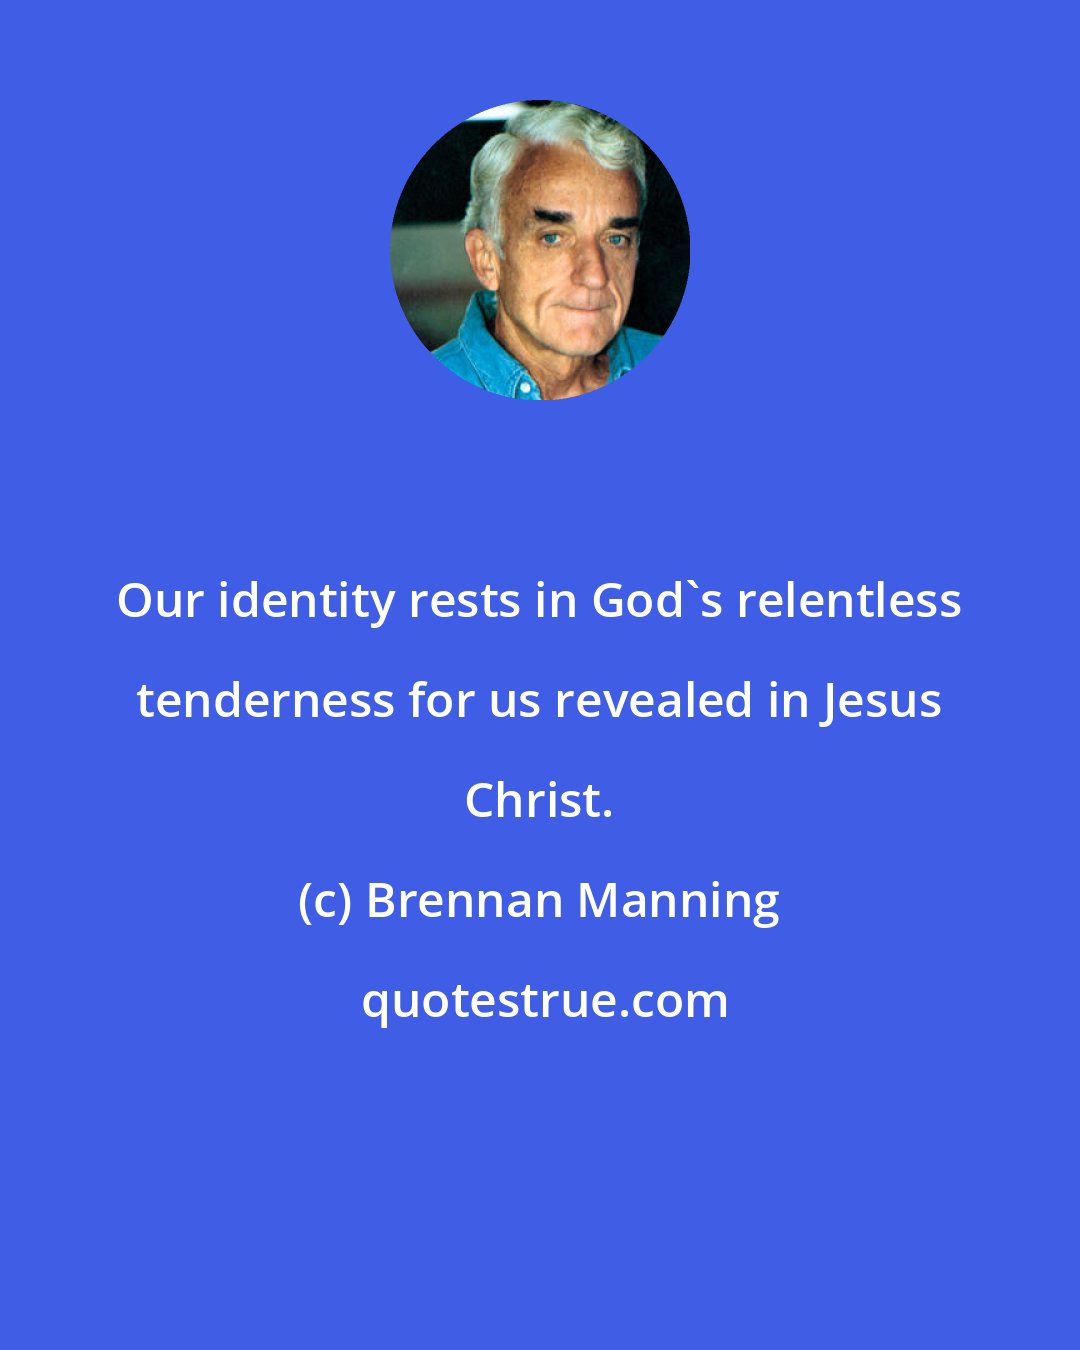 Brennan Manning: Our identity rests in God's relentless tenderness for us revealed in Jesus Christ.